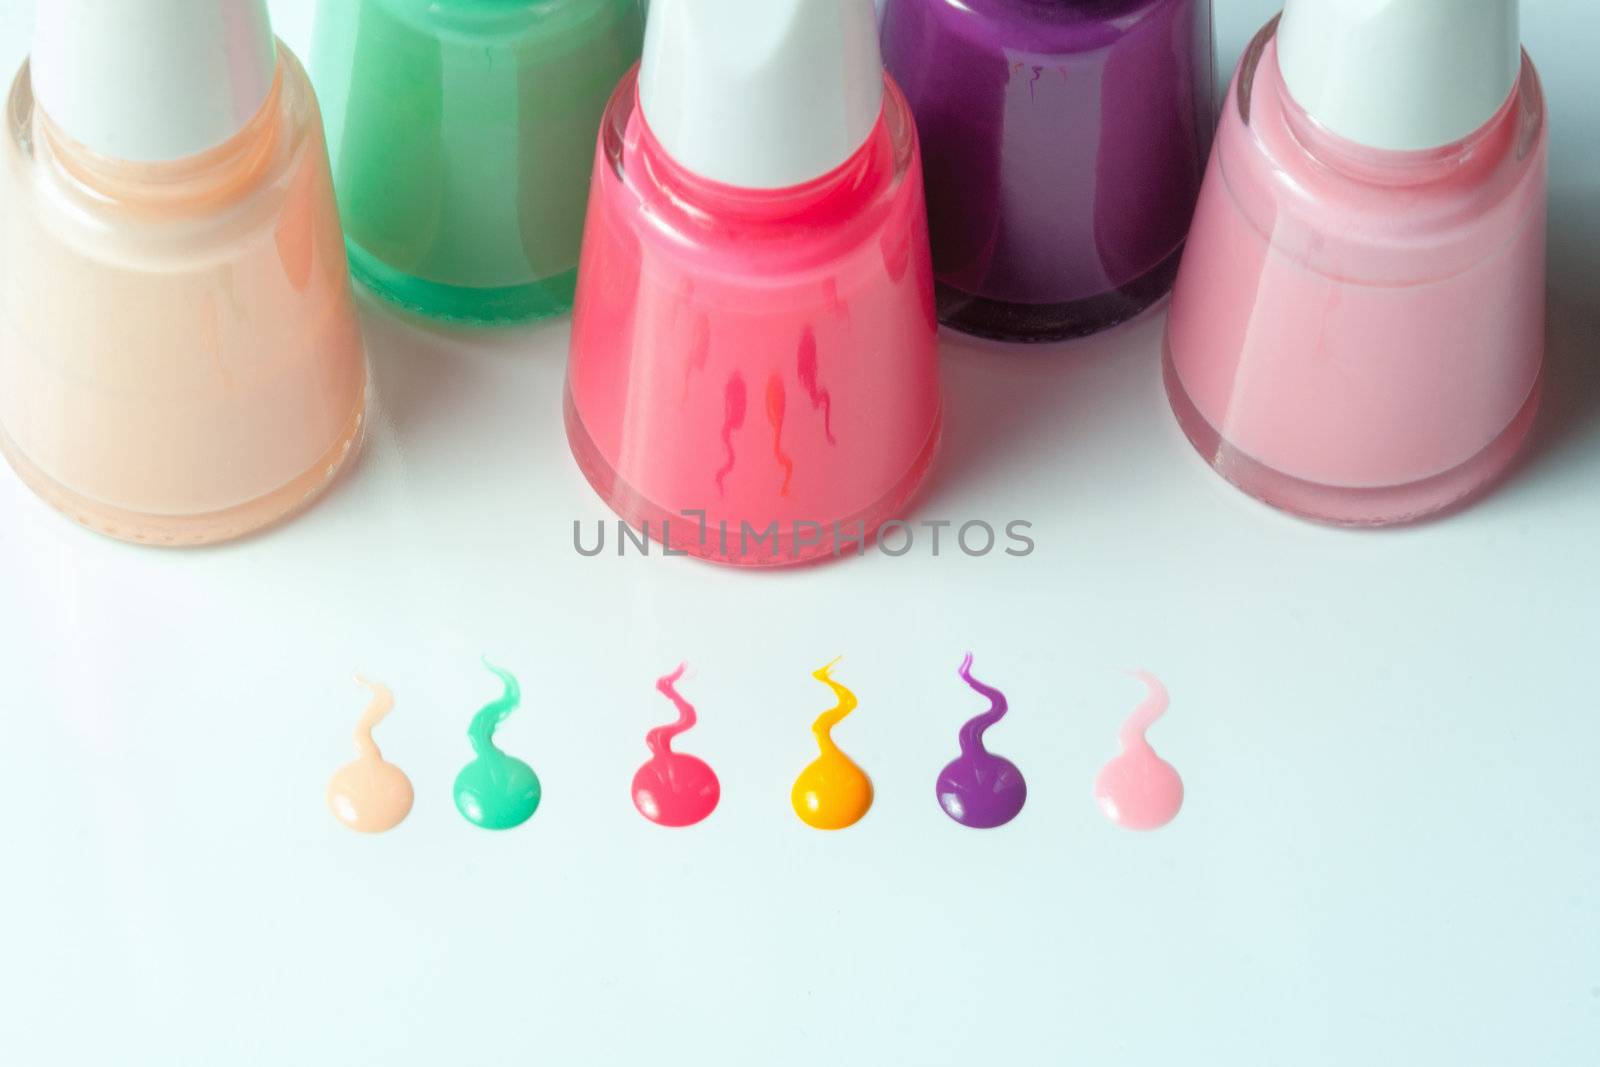 Bottles with spilled nail polish by sfinks